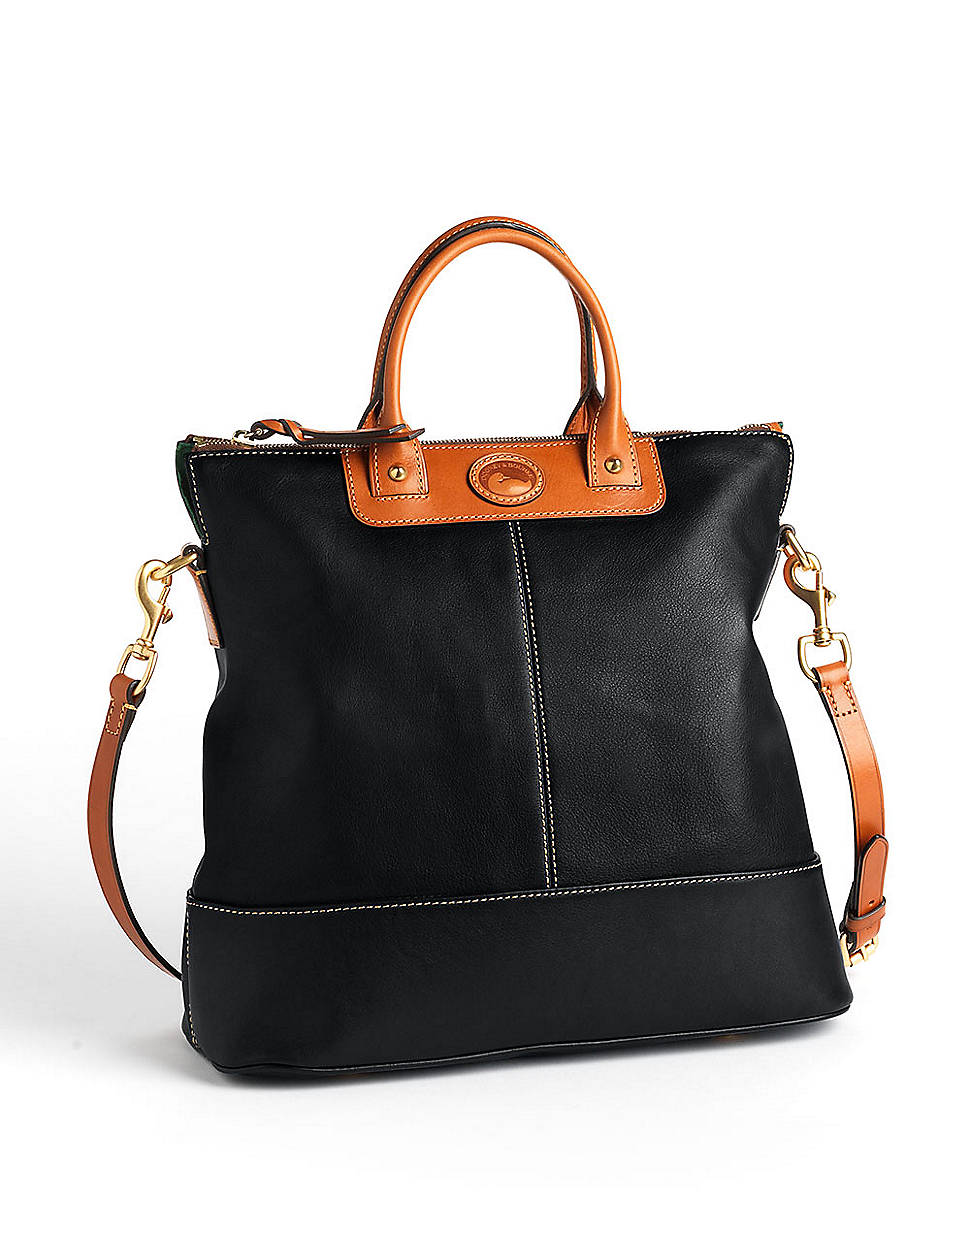 Dooney & Bourke Convertible Leather Shopper Tote Bag in Black | Lyst